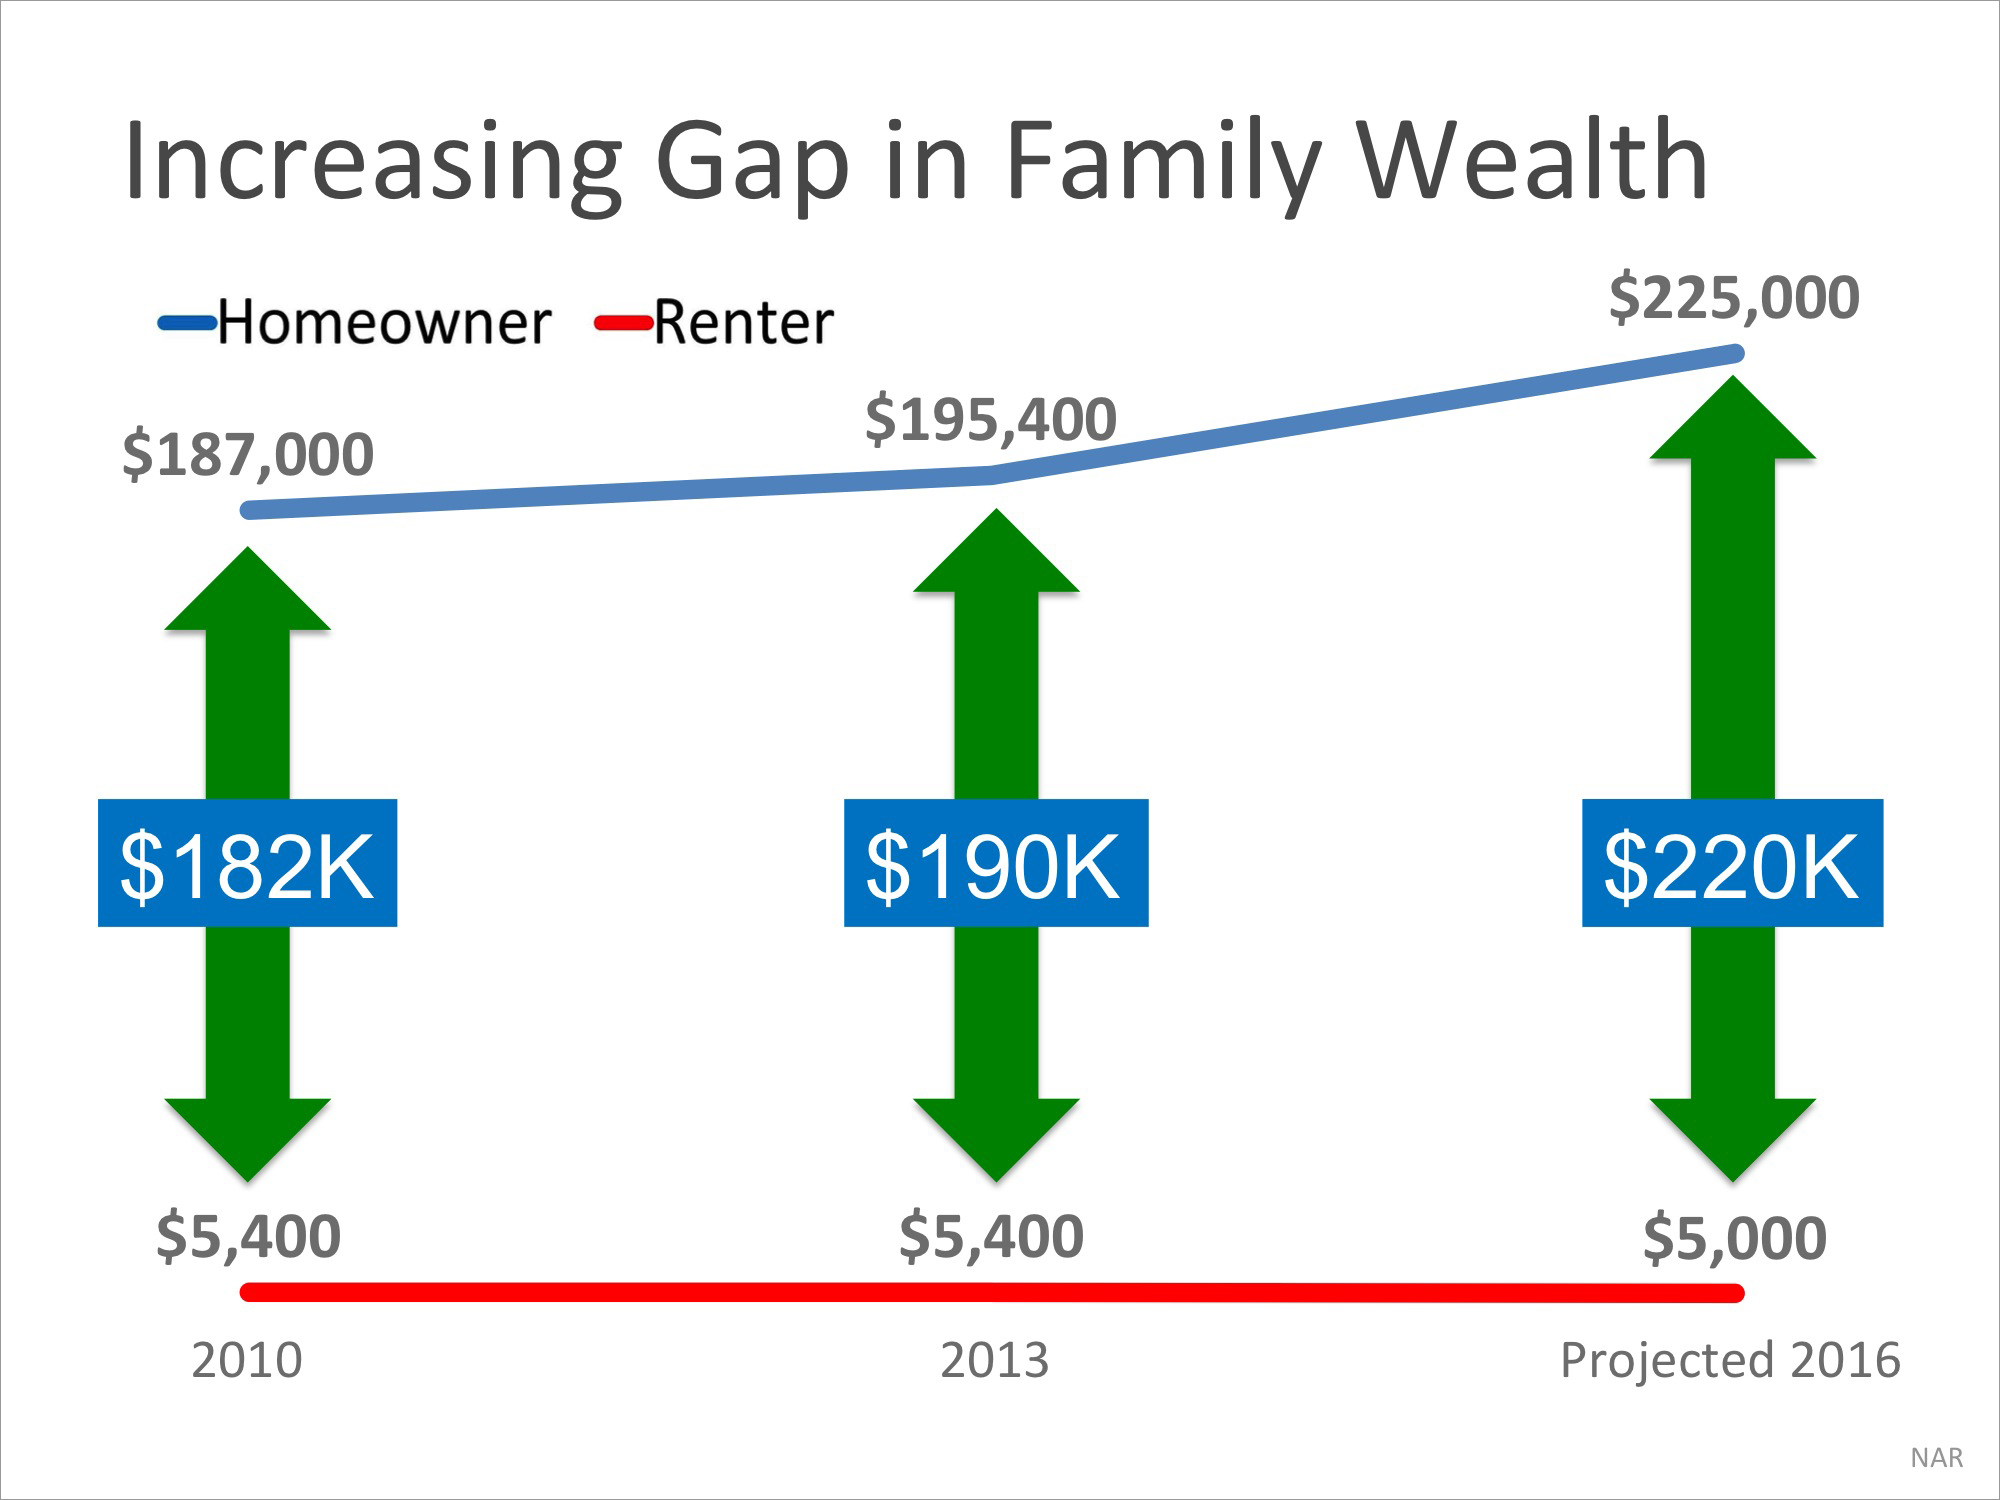 Homeowner&Atilde;&fnof;&Acirc;&cent;&Atilde;&cent;&acirc;&euro;&scaron;&Acirc;&not;&Atilde;&cent;&acirc;&euro;&#382;&Acirc;&cent;s Net Worth Is 45x Greater Than a Renter&Atilde;&fnof;&Acirc;&cent;&Atilde;&cent;&acirc;&euro;&scaron;&Acirc;&not;&Atilde;&cent;&acirc;&euro;&#382;&Acirc;&cent;s | MyKCM